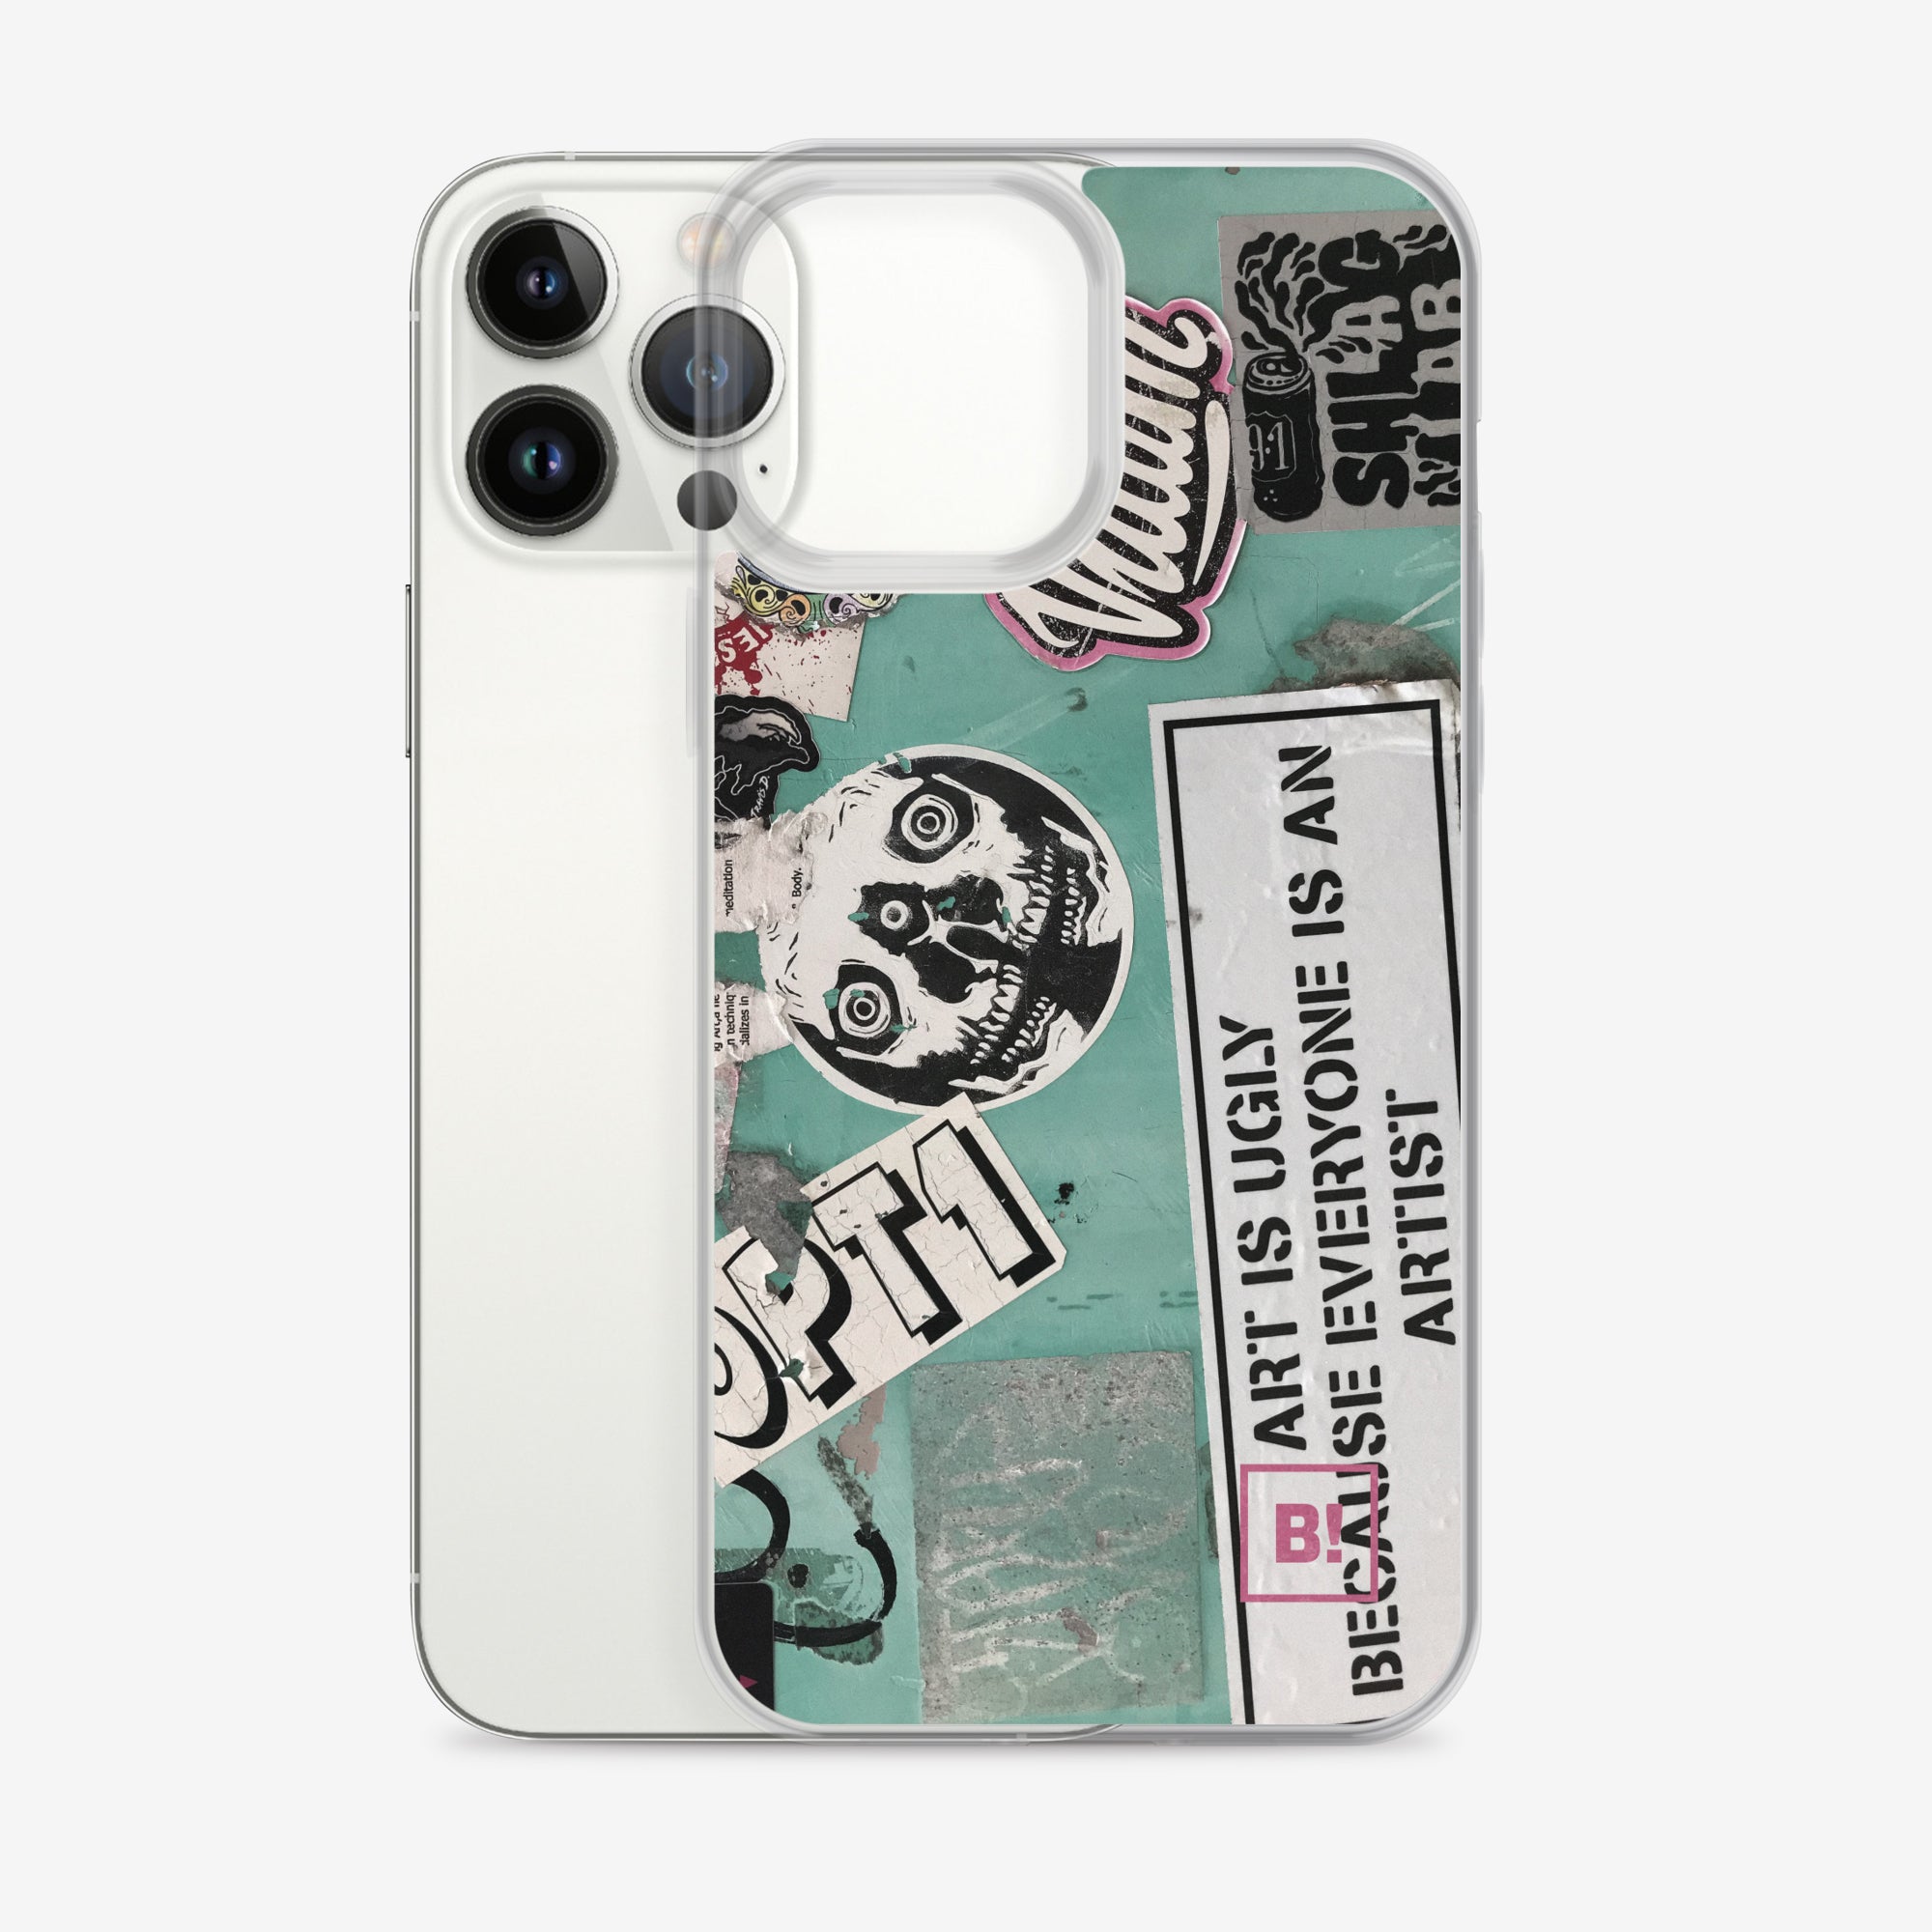 Binspired Art Is Ugly Urban Art iPhone 13 Pro Max Case with Phone